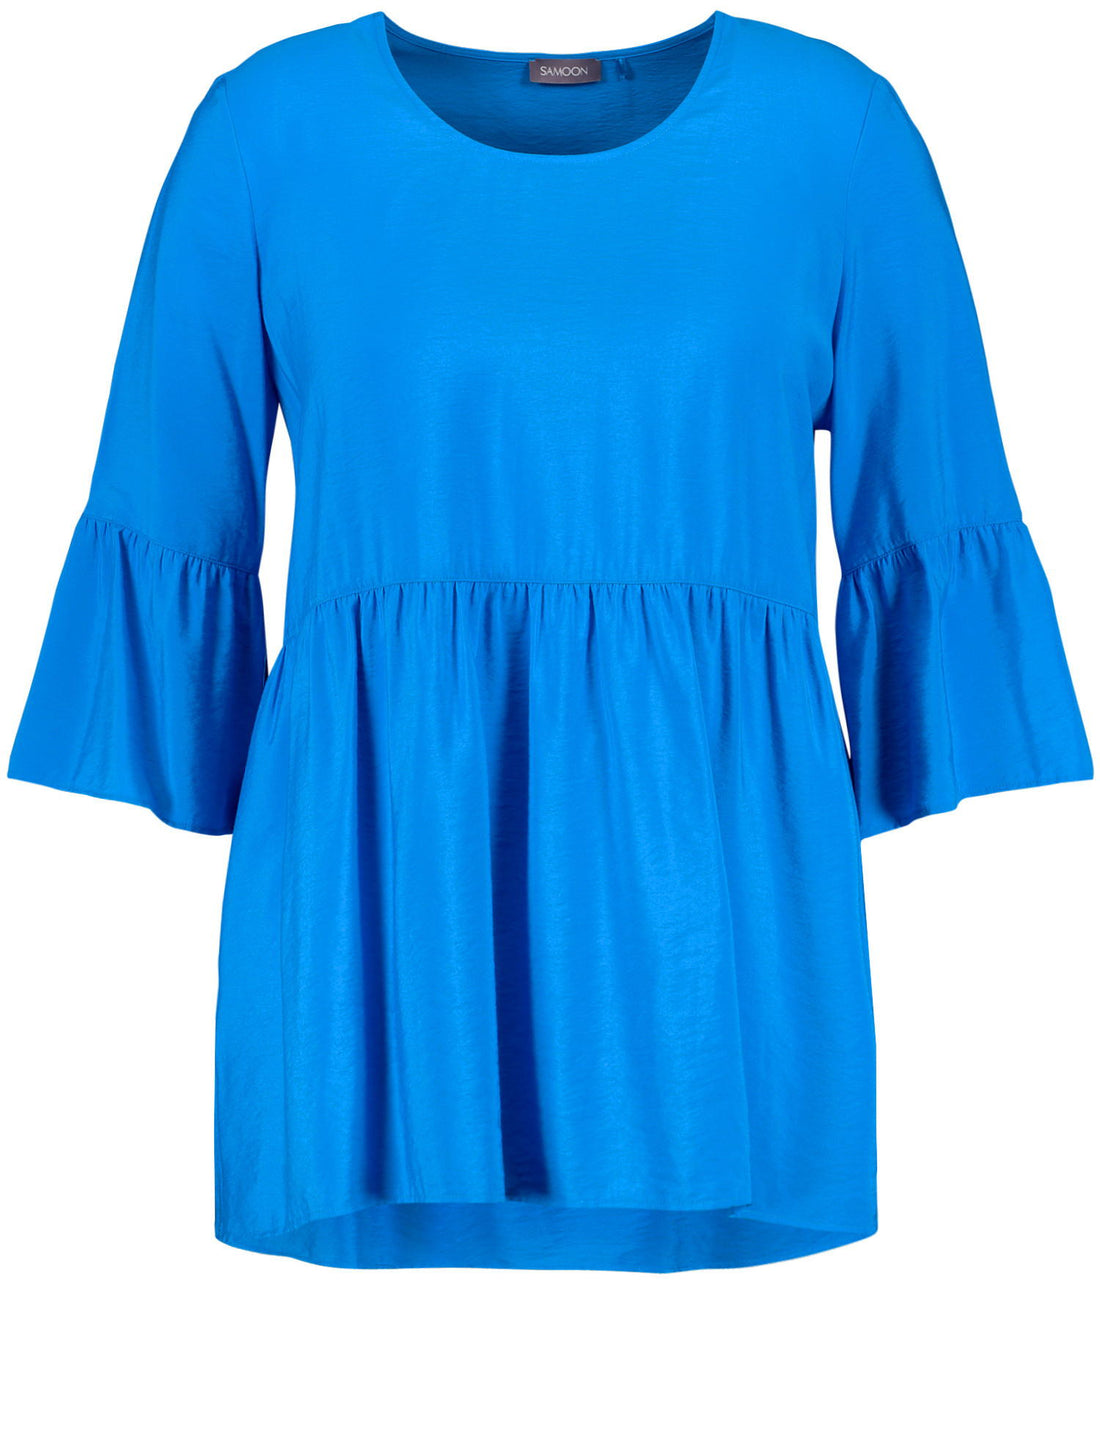 Flared Blouse With Flounces_960984-29243_8840_02